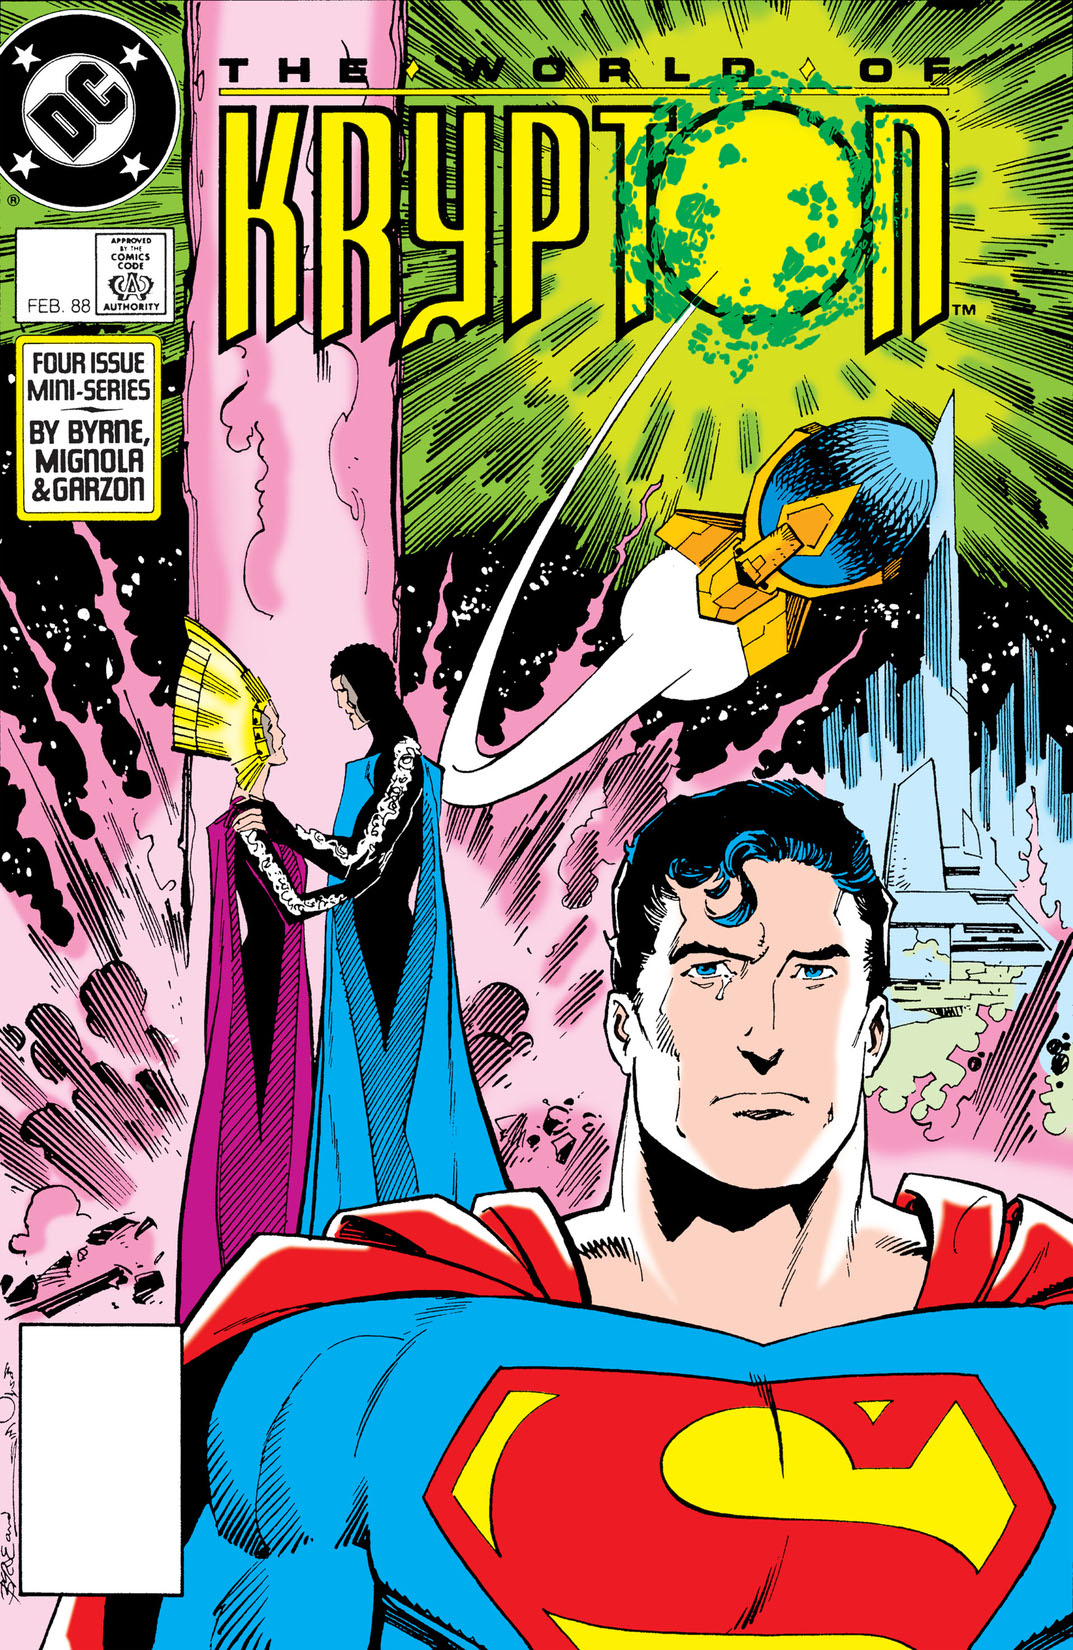 The World of Krypton #4 preview images